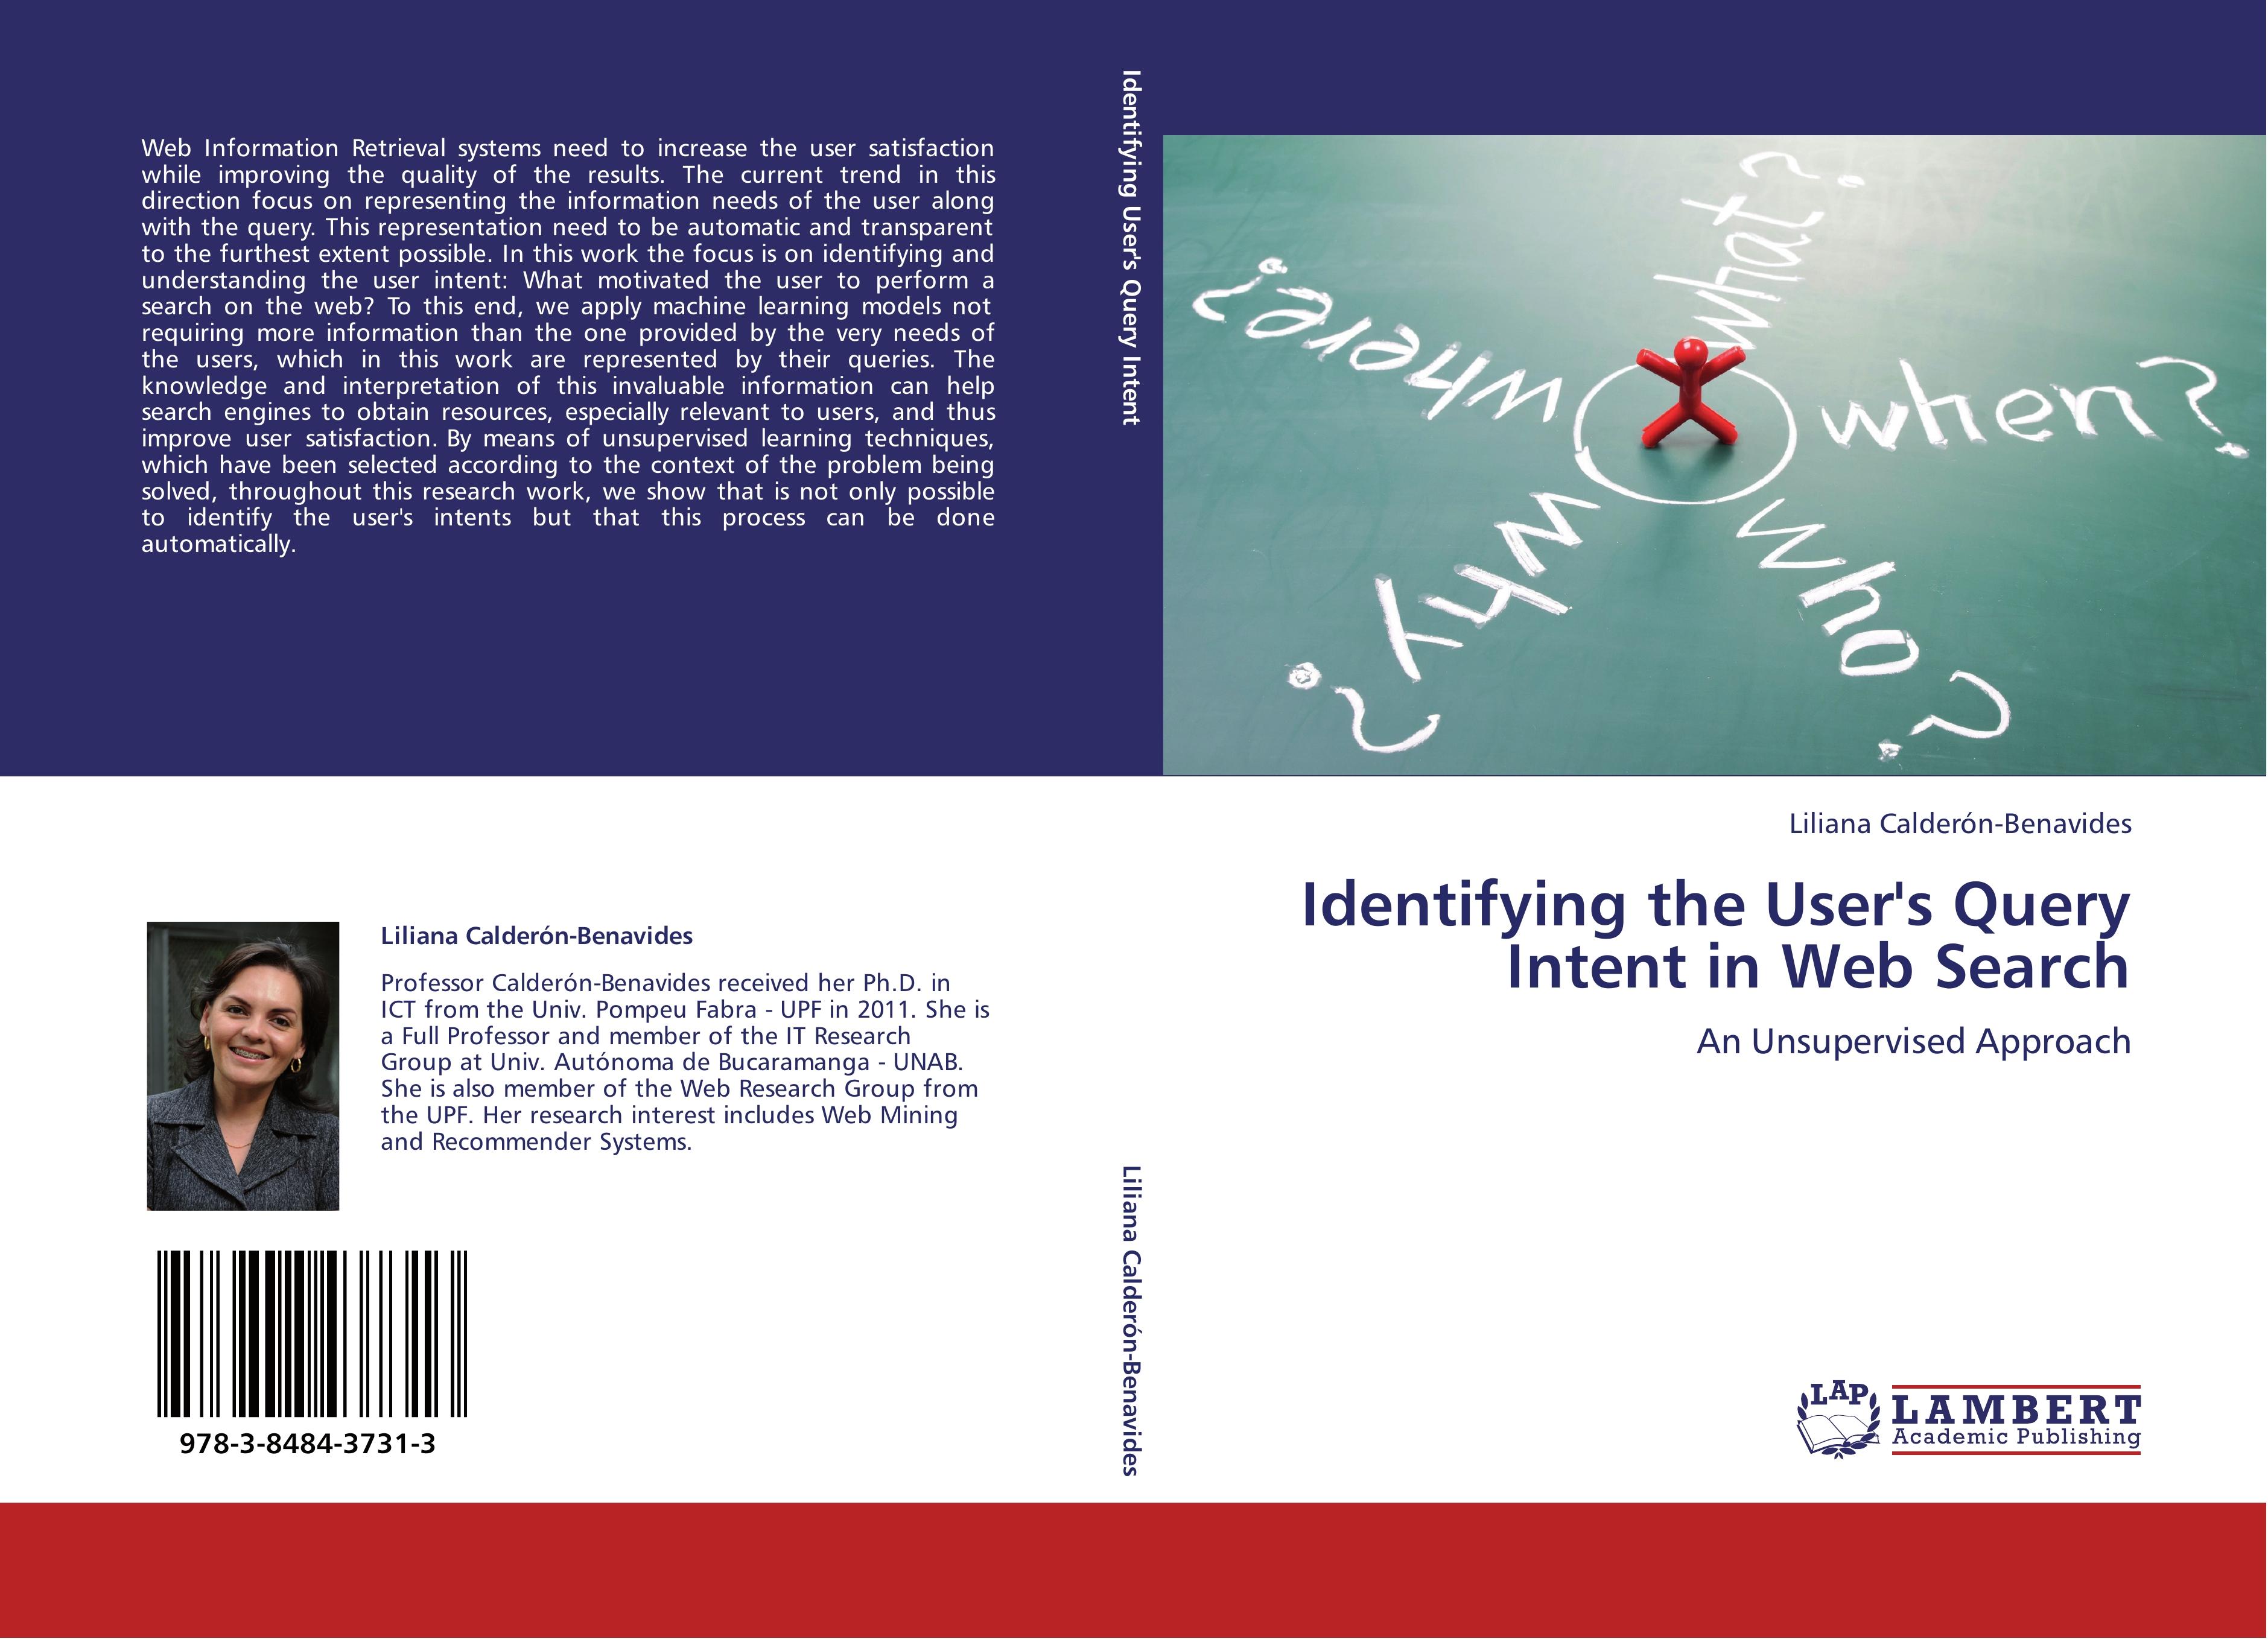 Identifying the User's Query Intent in Web Search / An Unsupervised Approach / Liliana Calderón-Benavides / Taschenbuch / Paperback / 136 S. / Englisch / 2012 / LAP LAMBERT Academic Publishing - Calderón-Benavides, Liliana